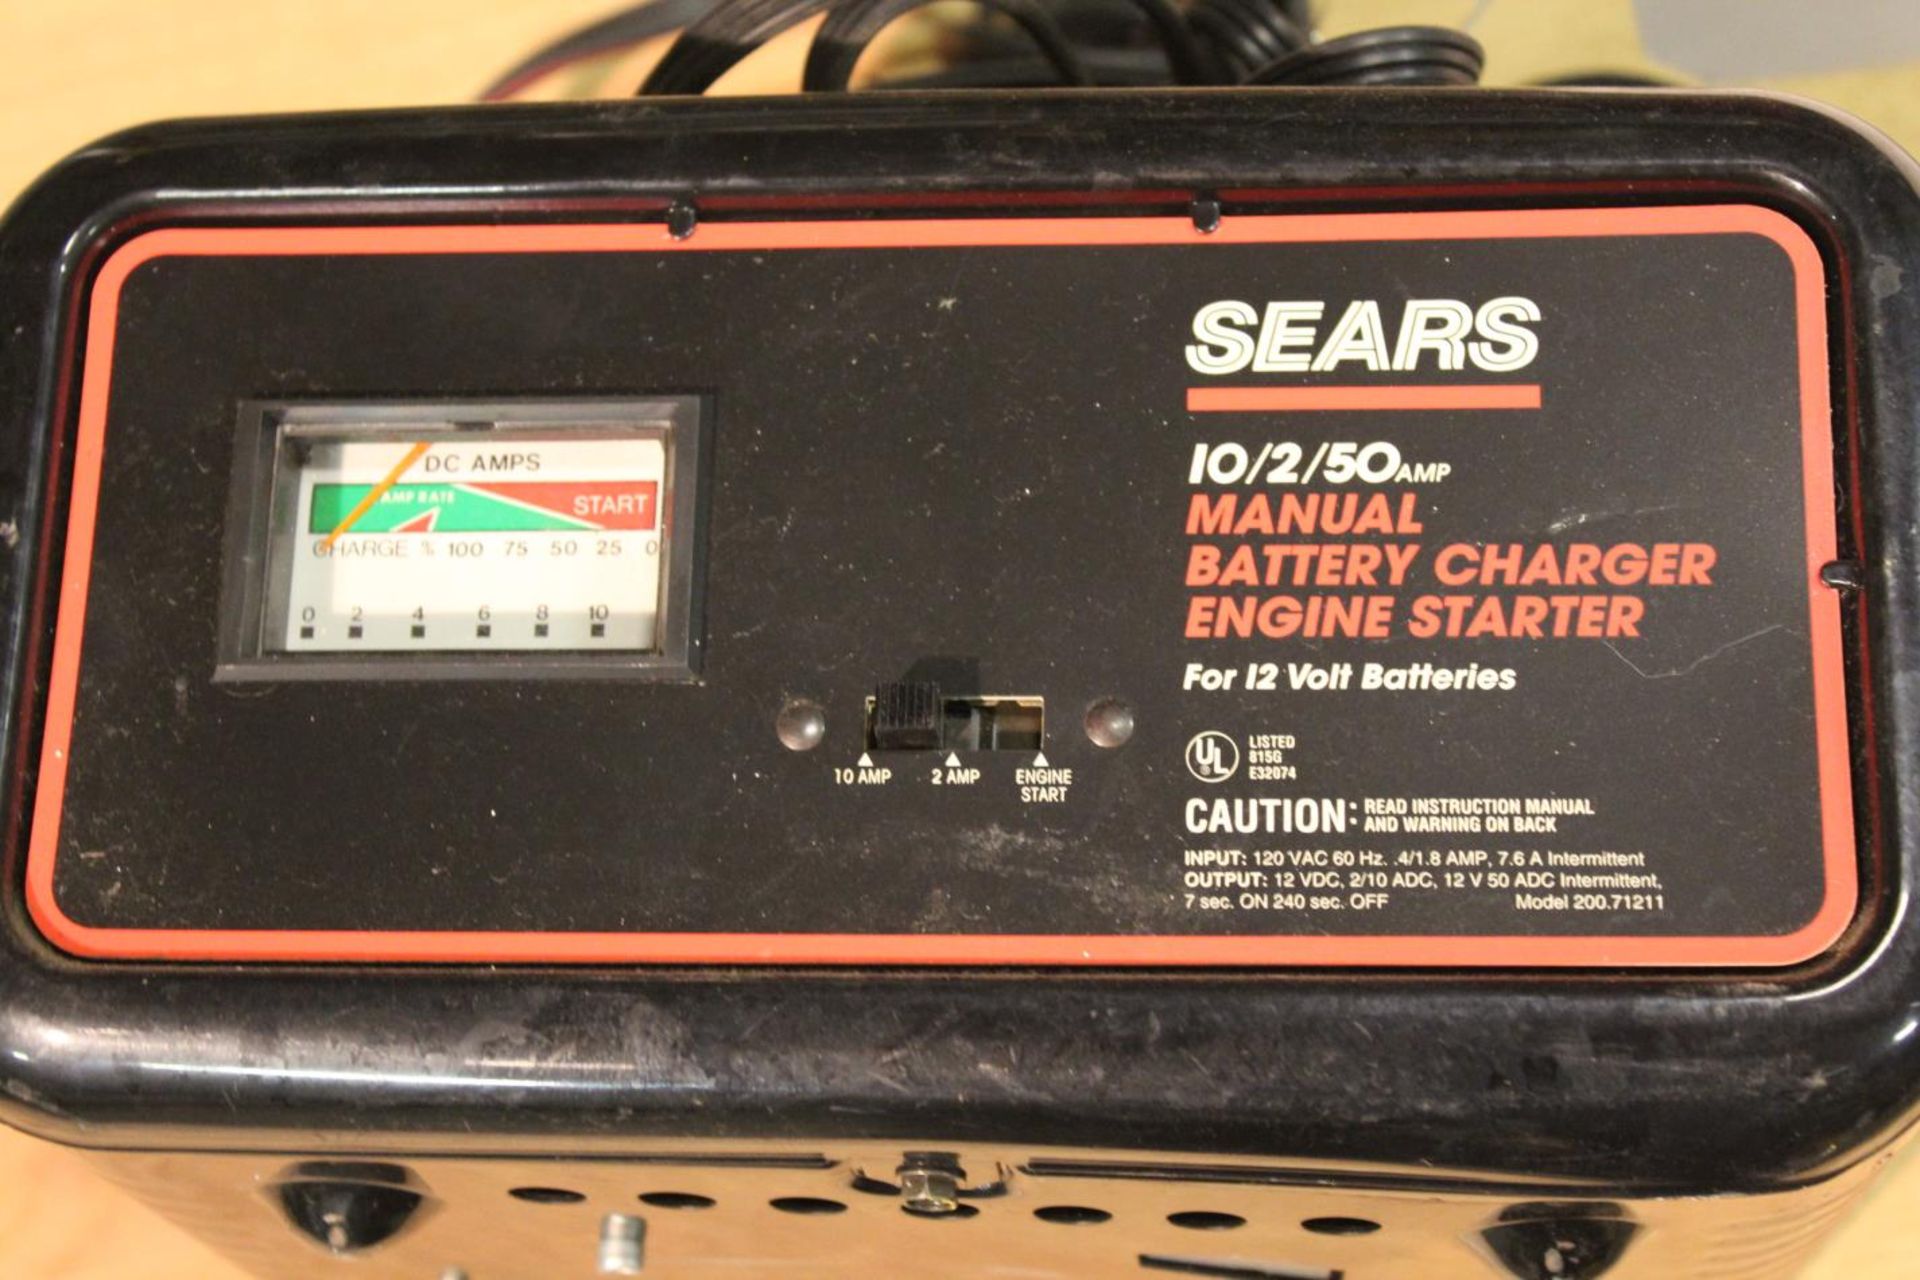 Sears 10/2/50 amp Battery charger - Image 2 of 2